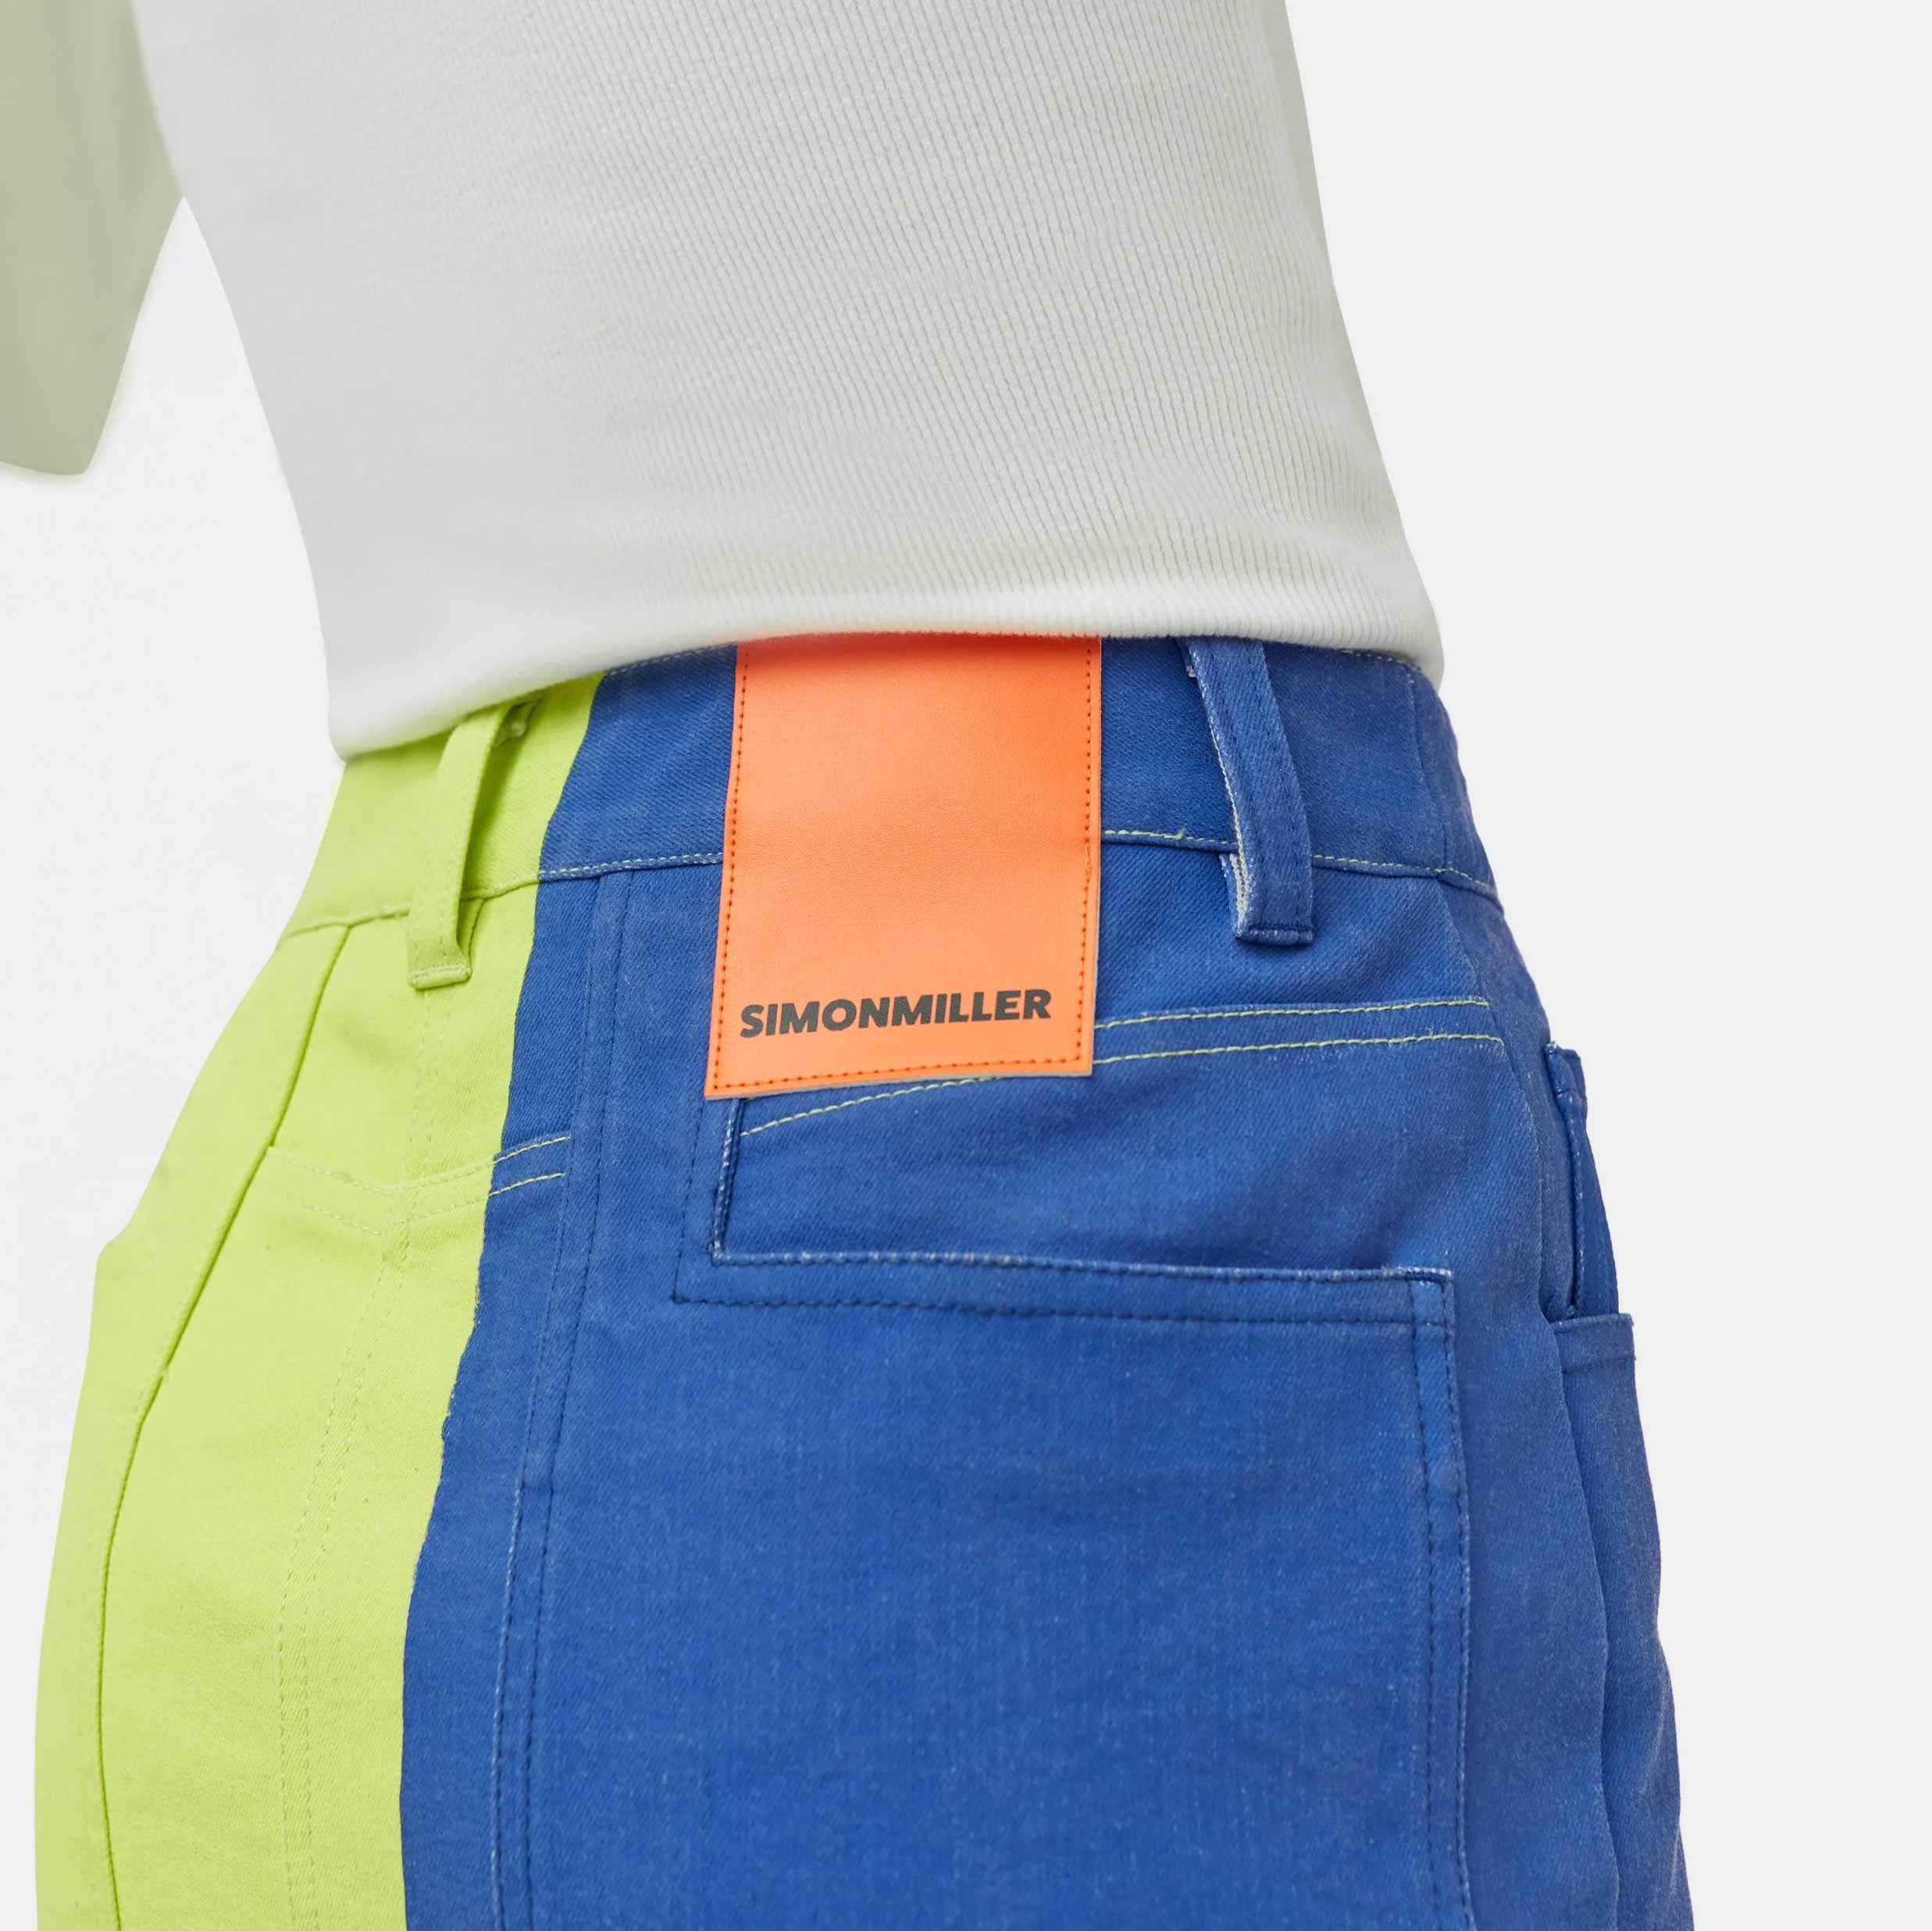 Close half body photo of model wearing the Simi Skirt - a full length denim skirt painted in color blocks of chartreuse, blue, and white - view of the back pocket and Simon Miller patch.